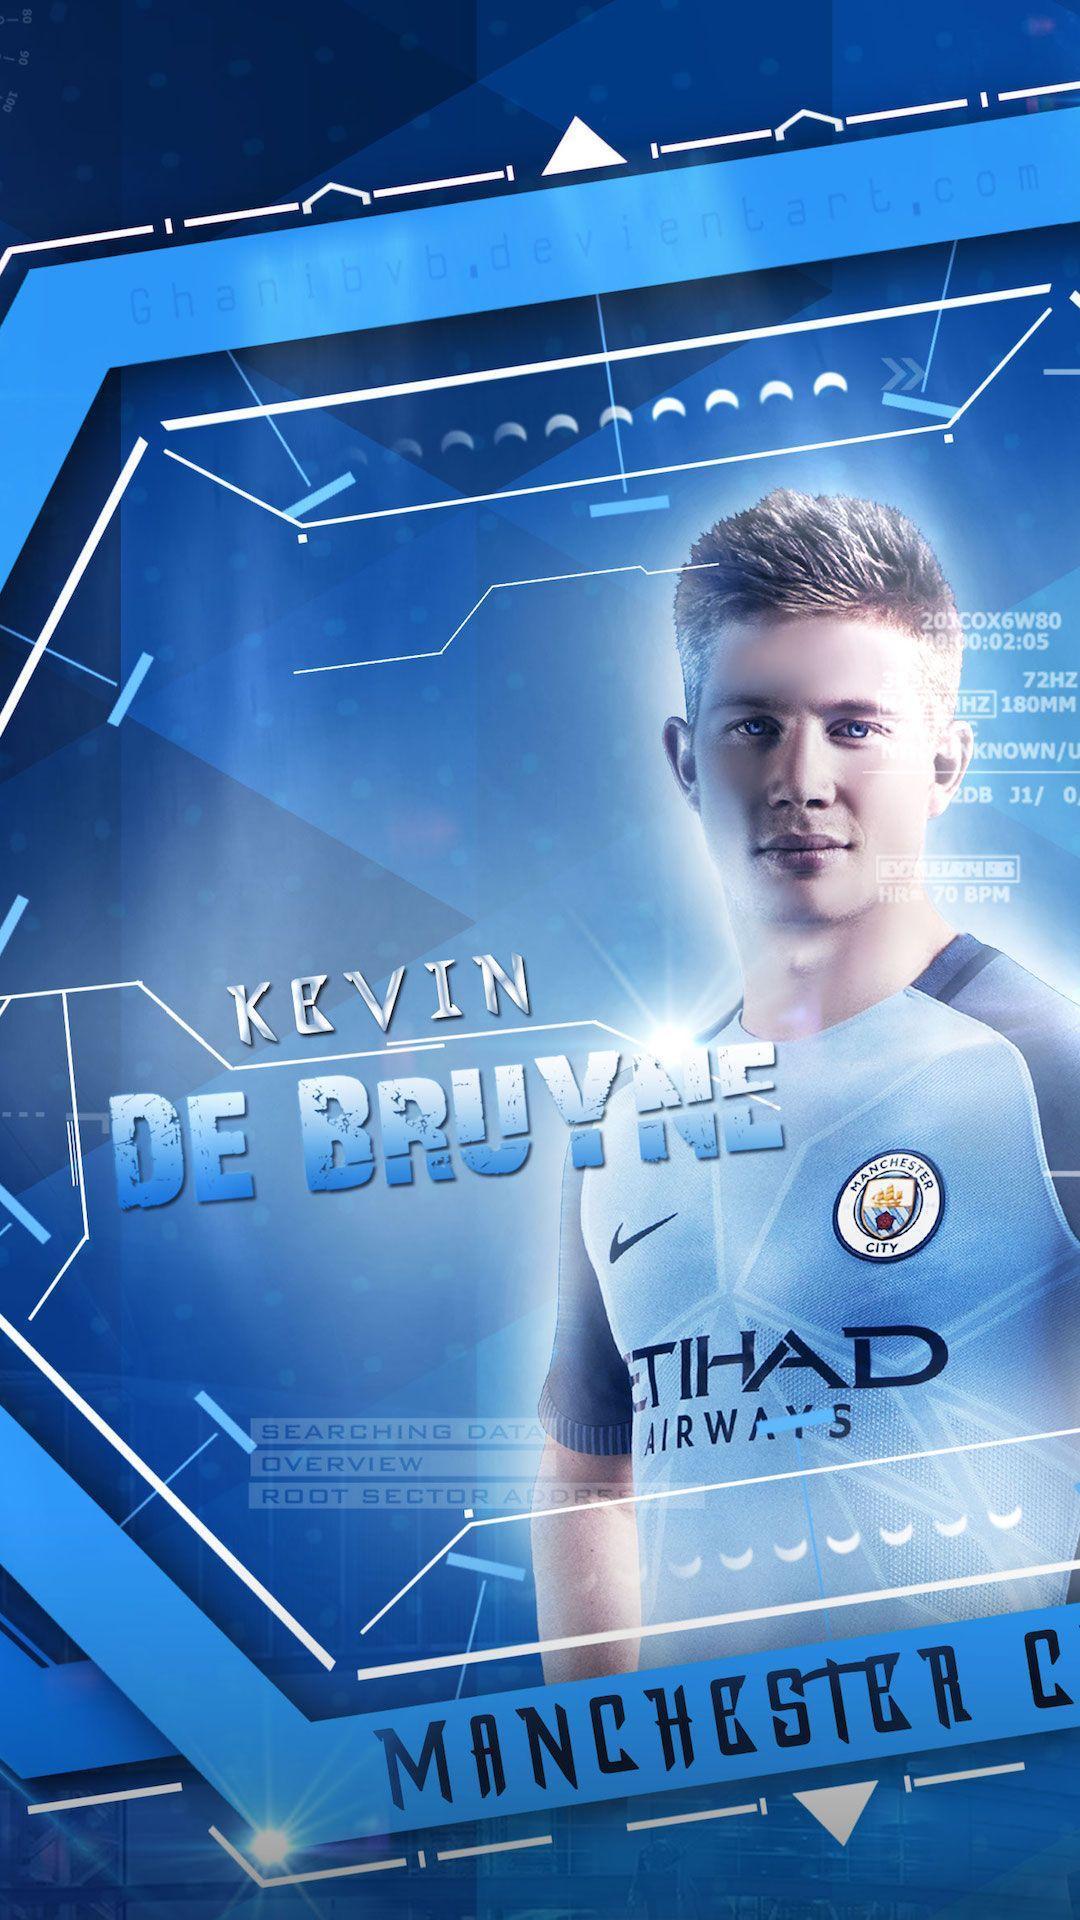 Kevin de bruyne wallpaper by Cfwall  Download on ZEDGE  8110